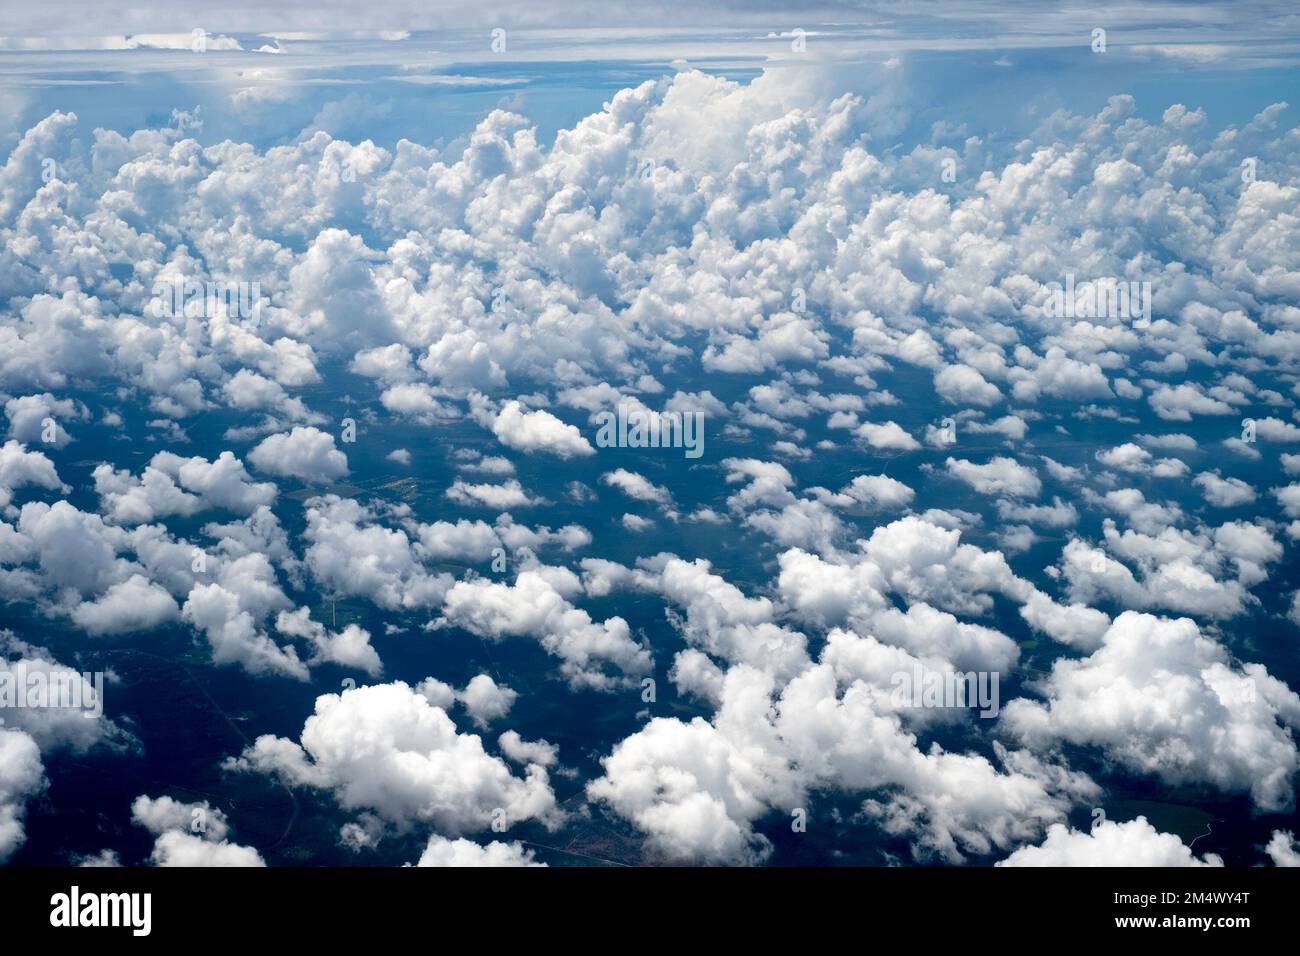 A view of clouds as seen from an airplane. Stock Photo